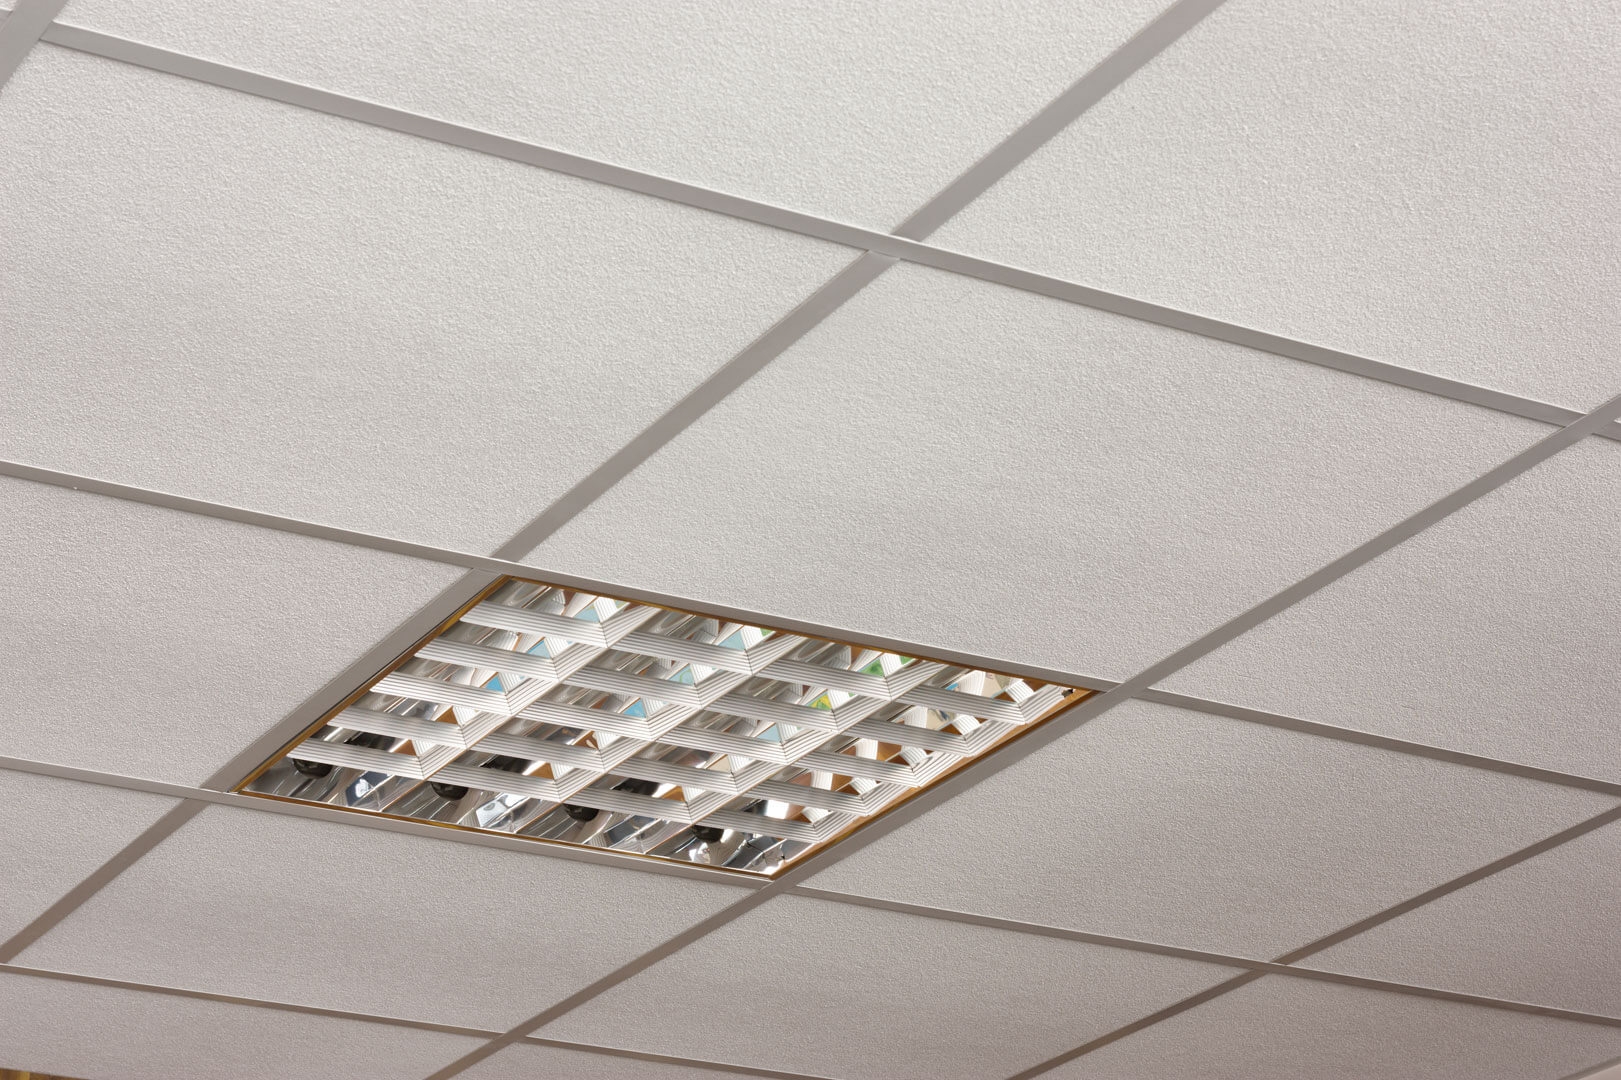 Tatra Suspended Ceiling Tiles